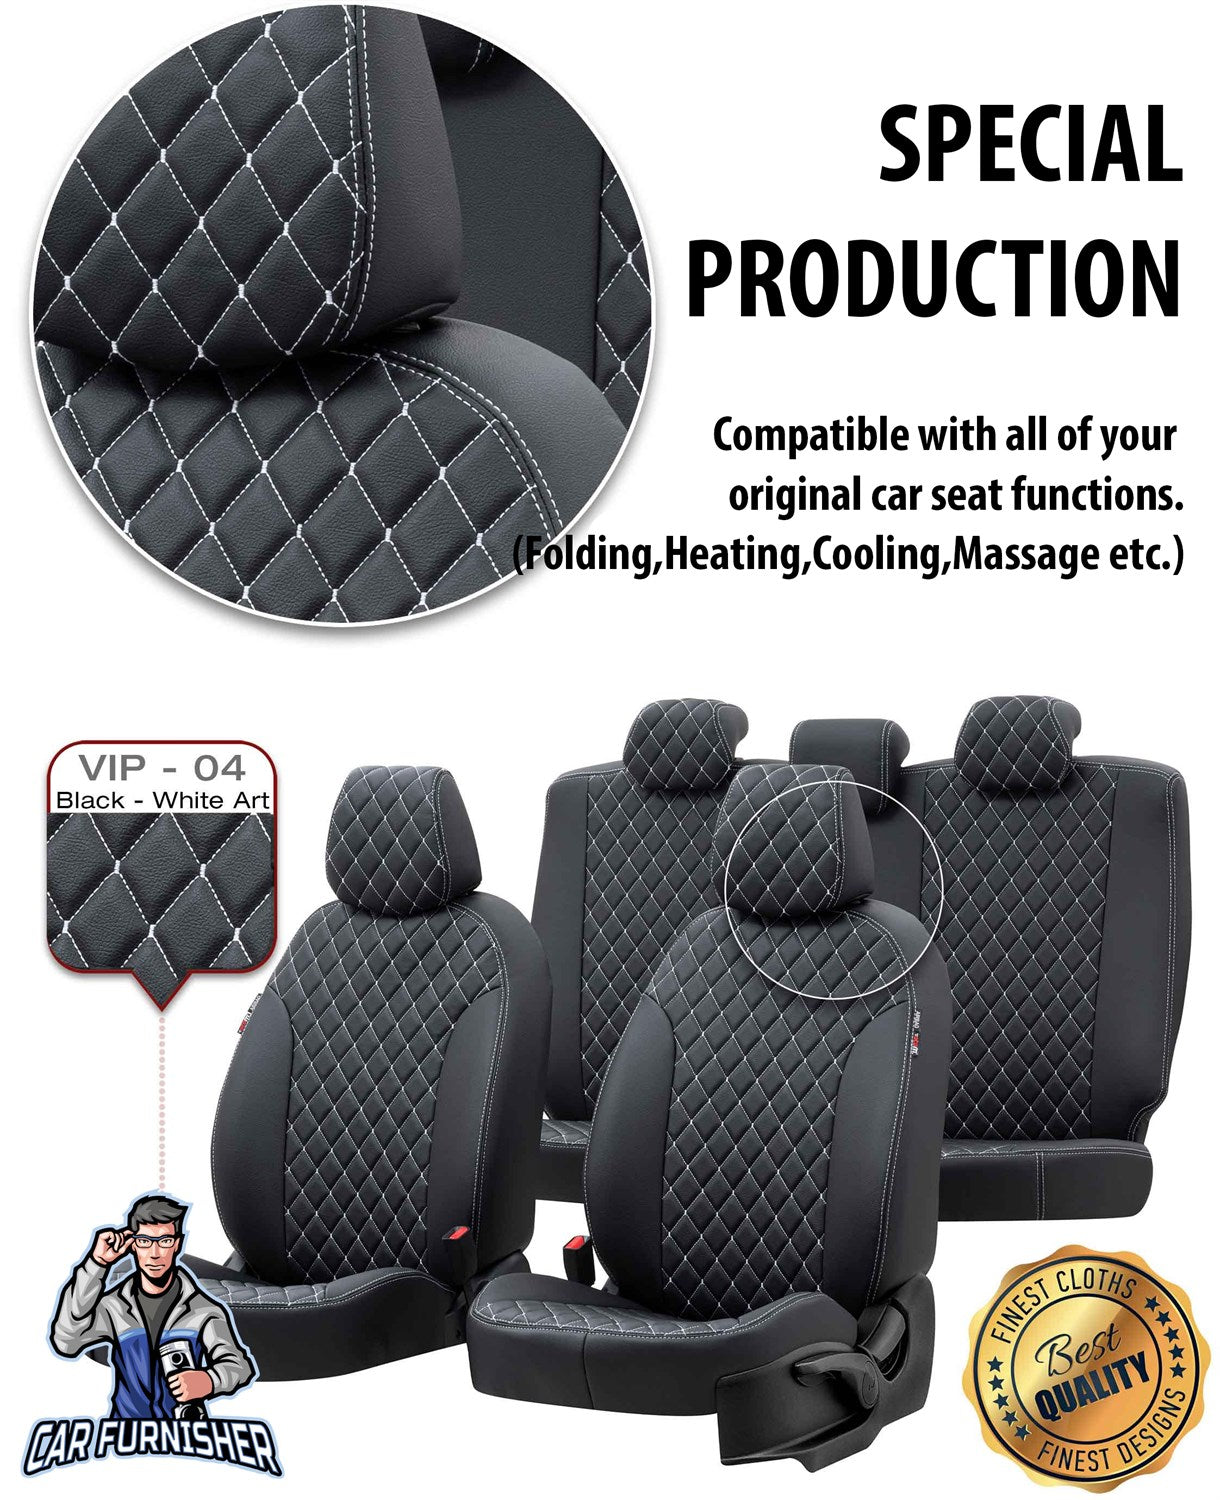 Peugeot Boxer Seat Covers Madrid Leather Design Dark Gray Leather